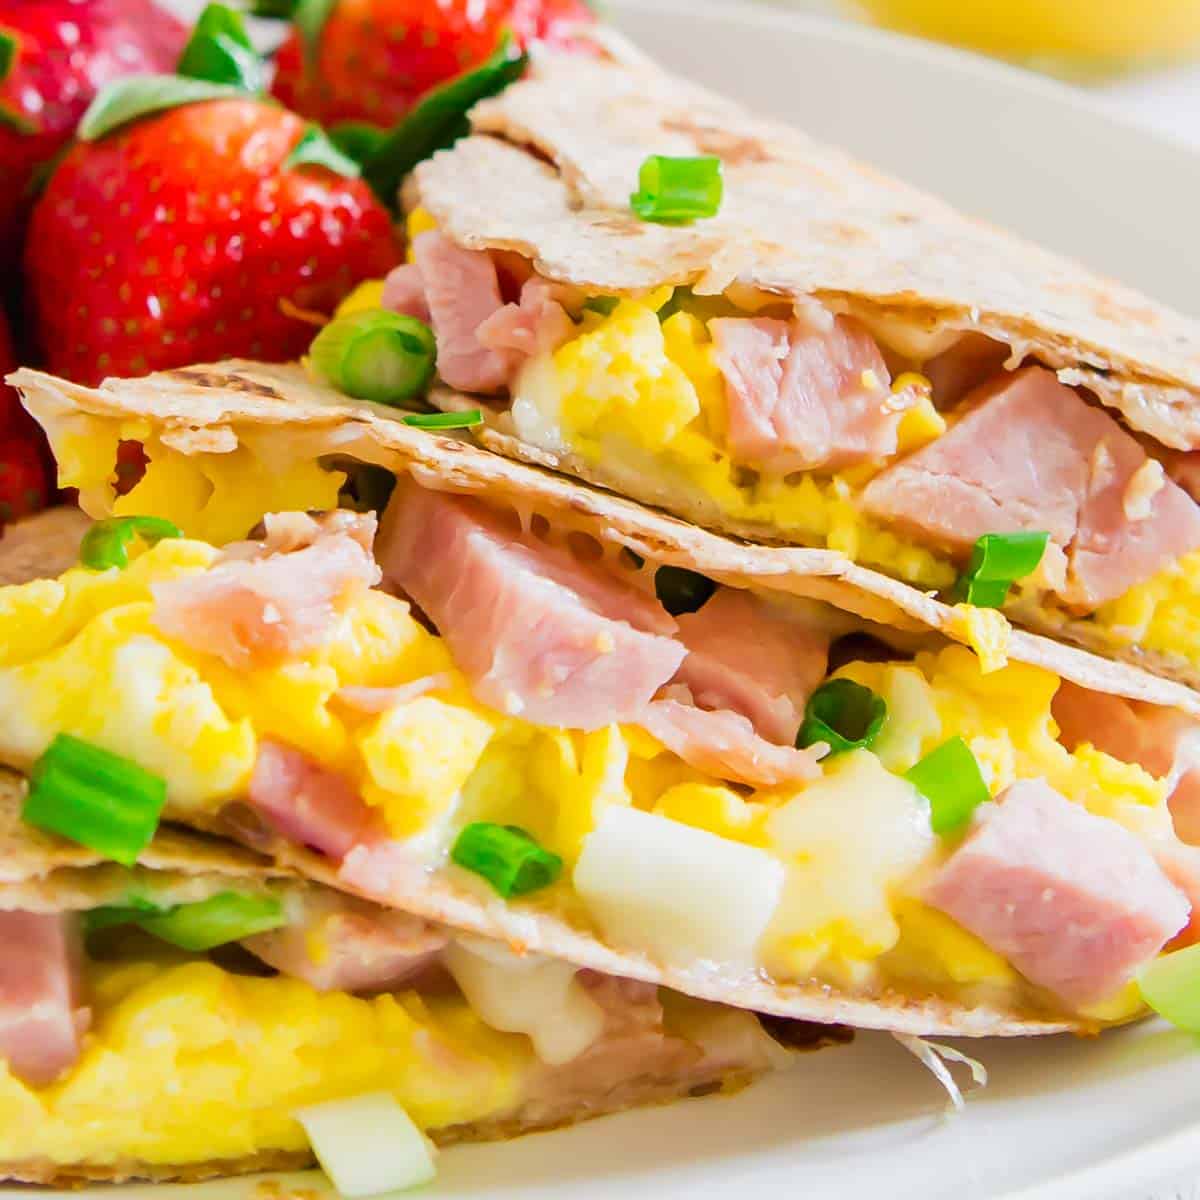 A plate of breakfast quesadillas with ham and eggs.